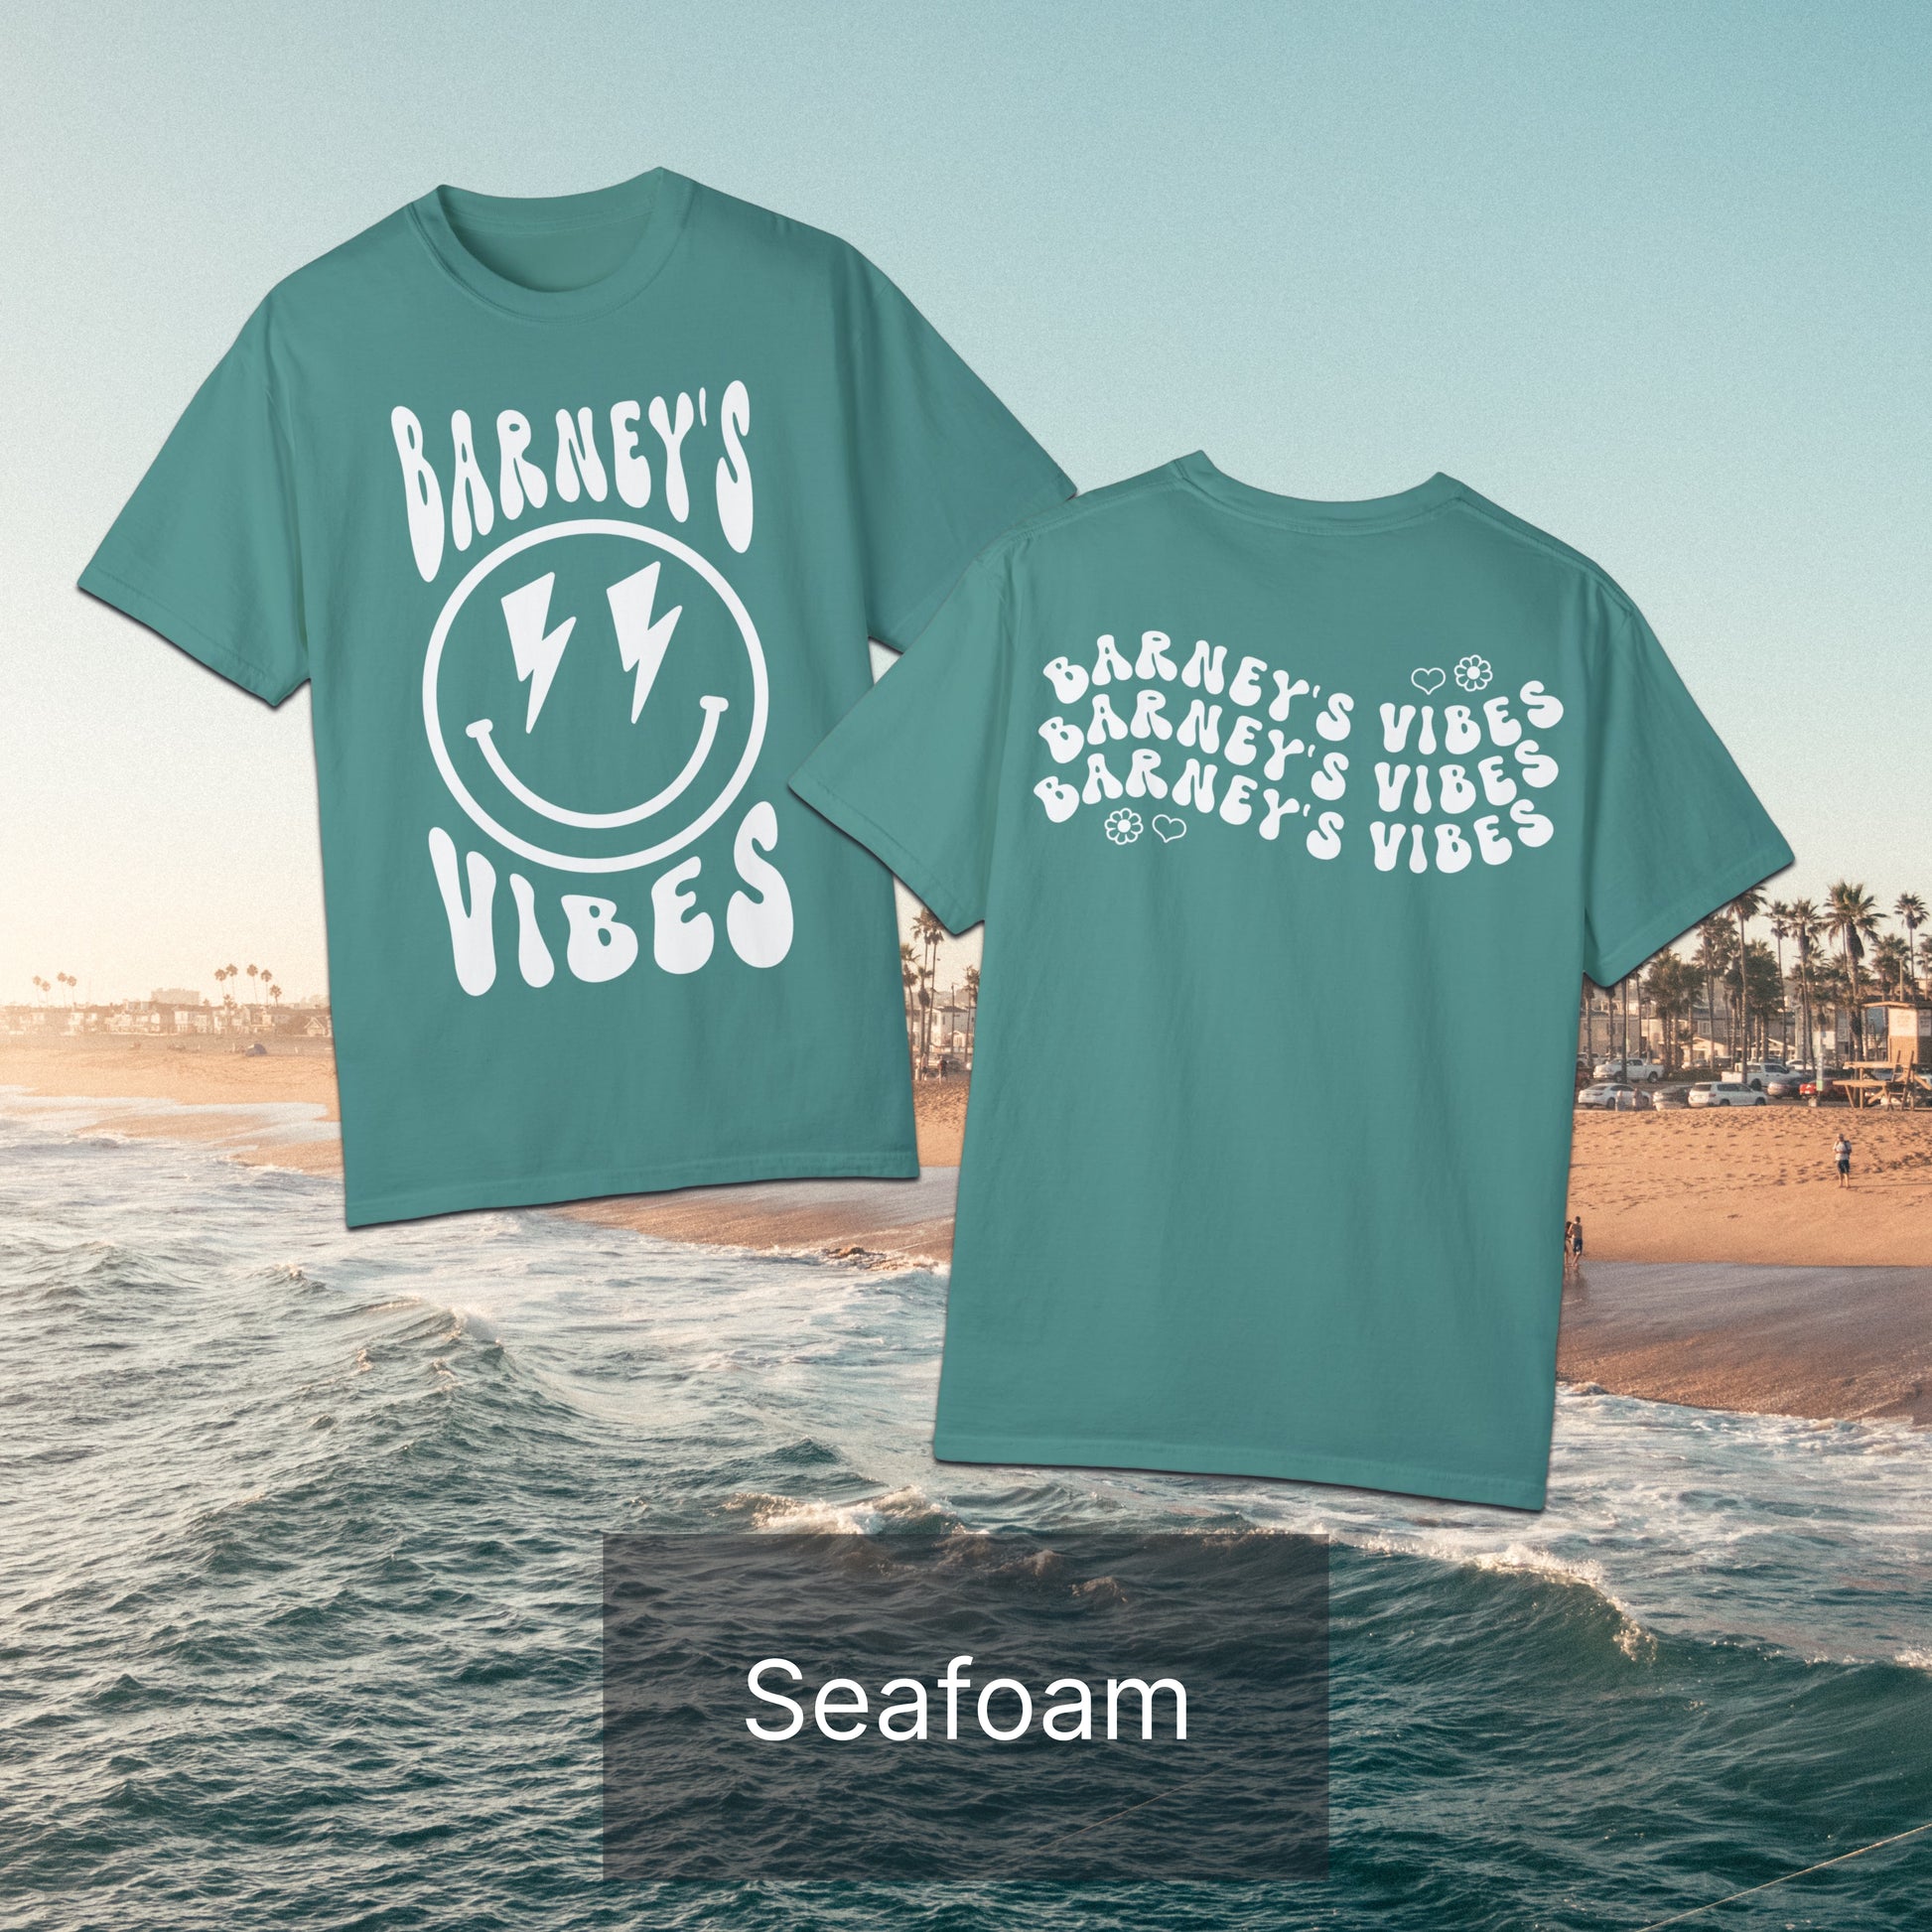 Barney's Vibes | BARNEY'S BEANERY - Women's Smiley Face Tee | White Graphics On Seafoam T-Shirt, Front And Back Flat Lay View